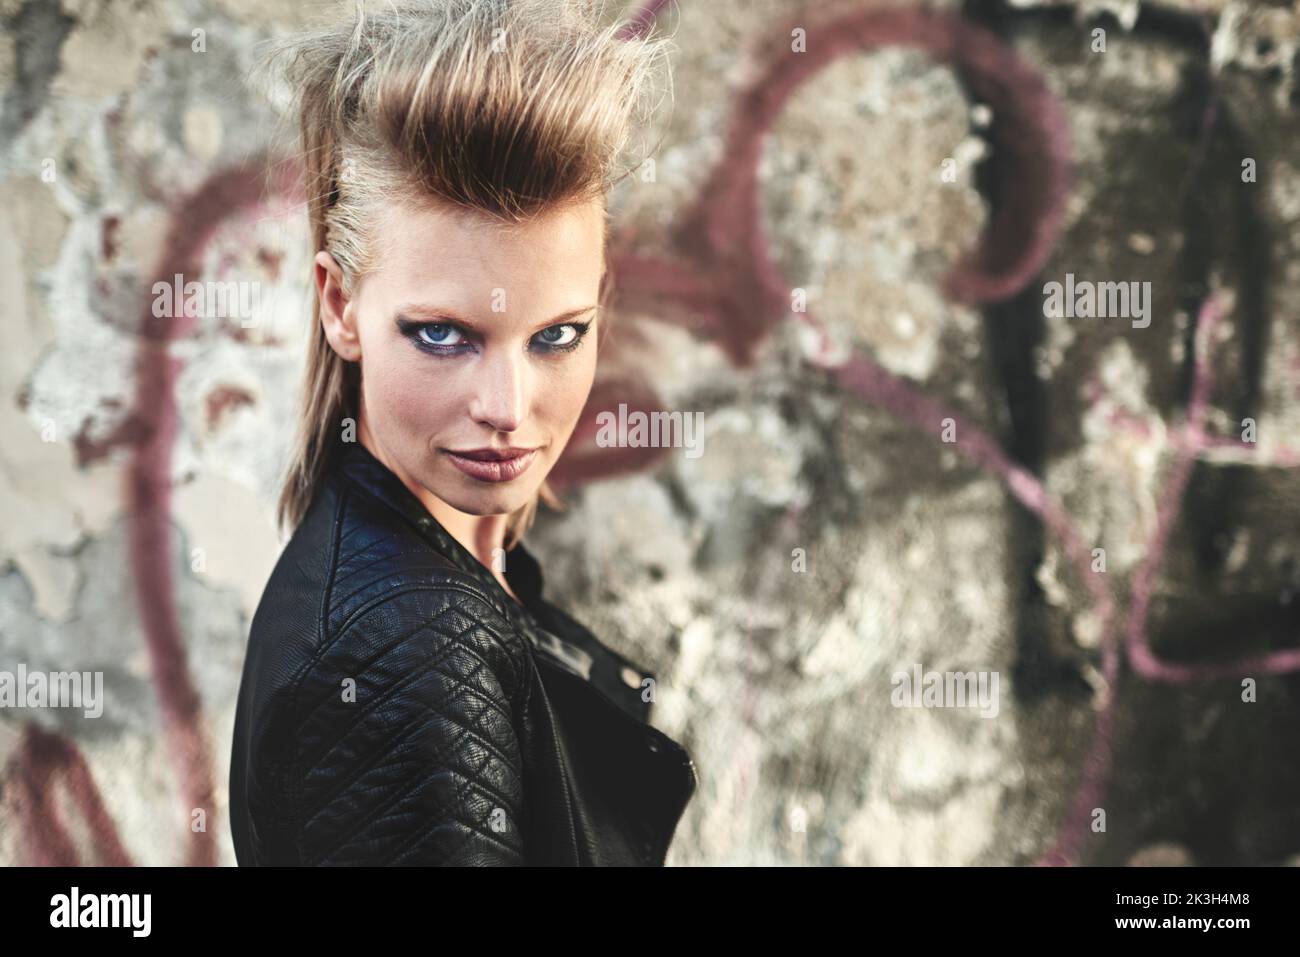 Im so rock n roll. Cropped portrait of an edgy young woman in an urban setting. Stock Photo